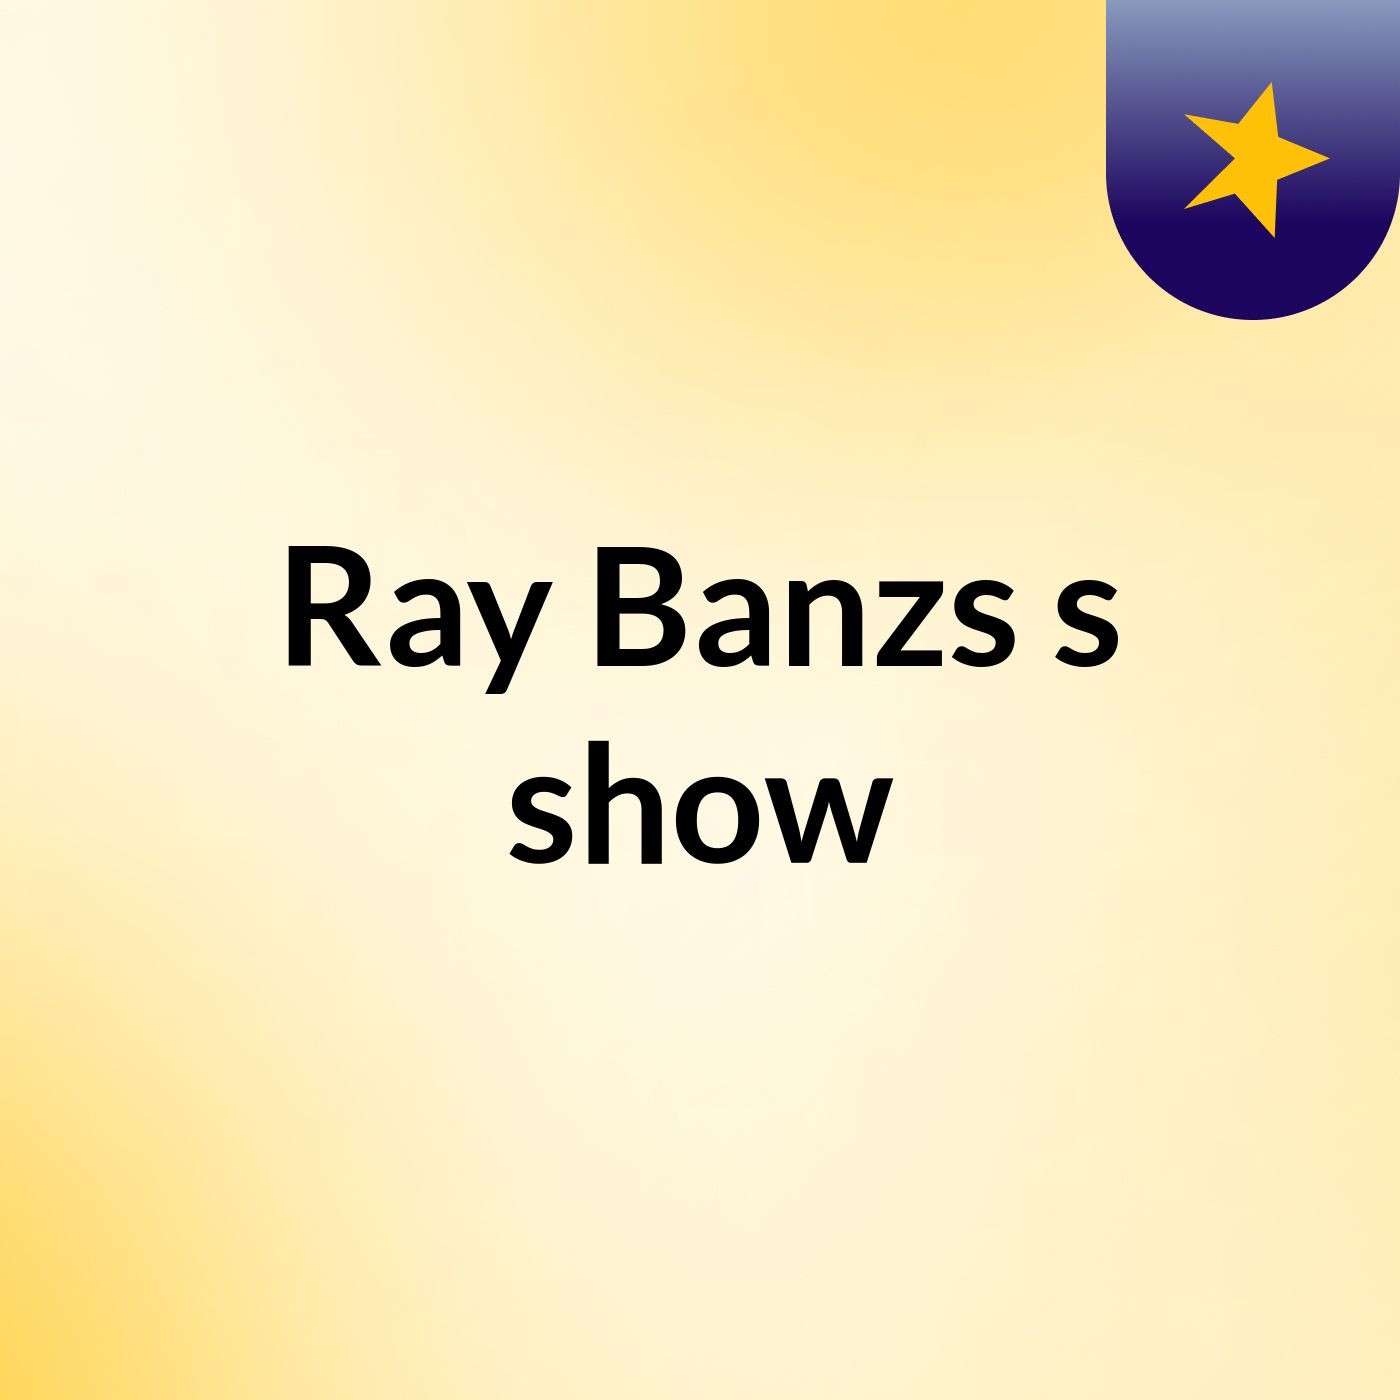 Ray Banzs's show